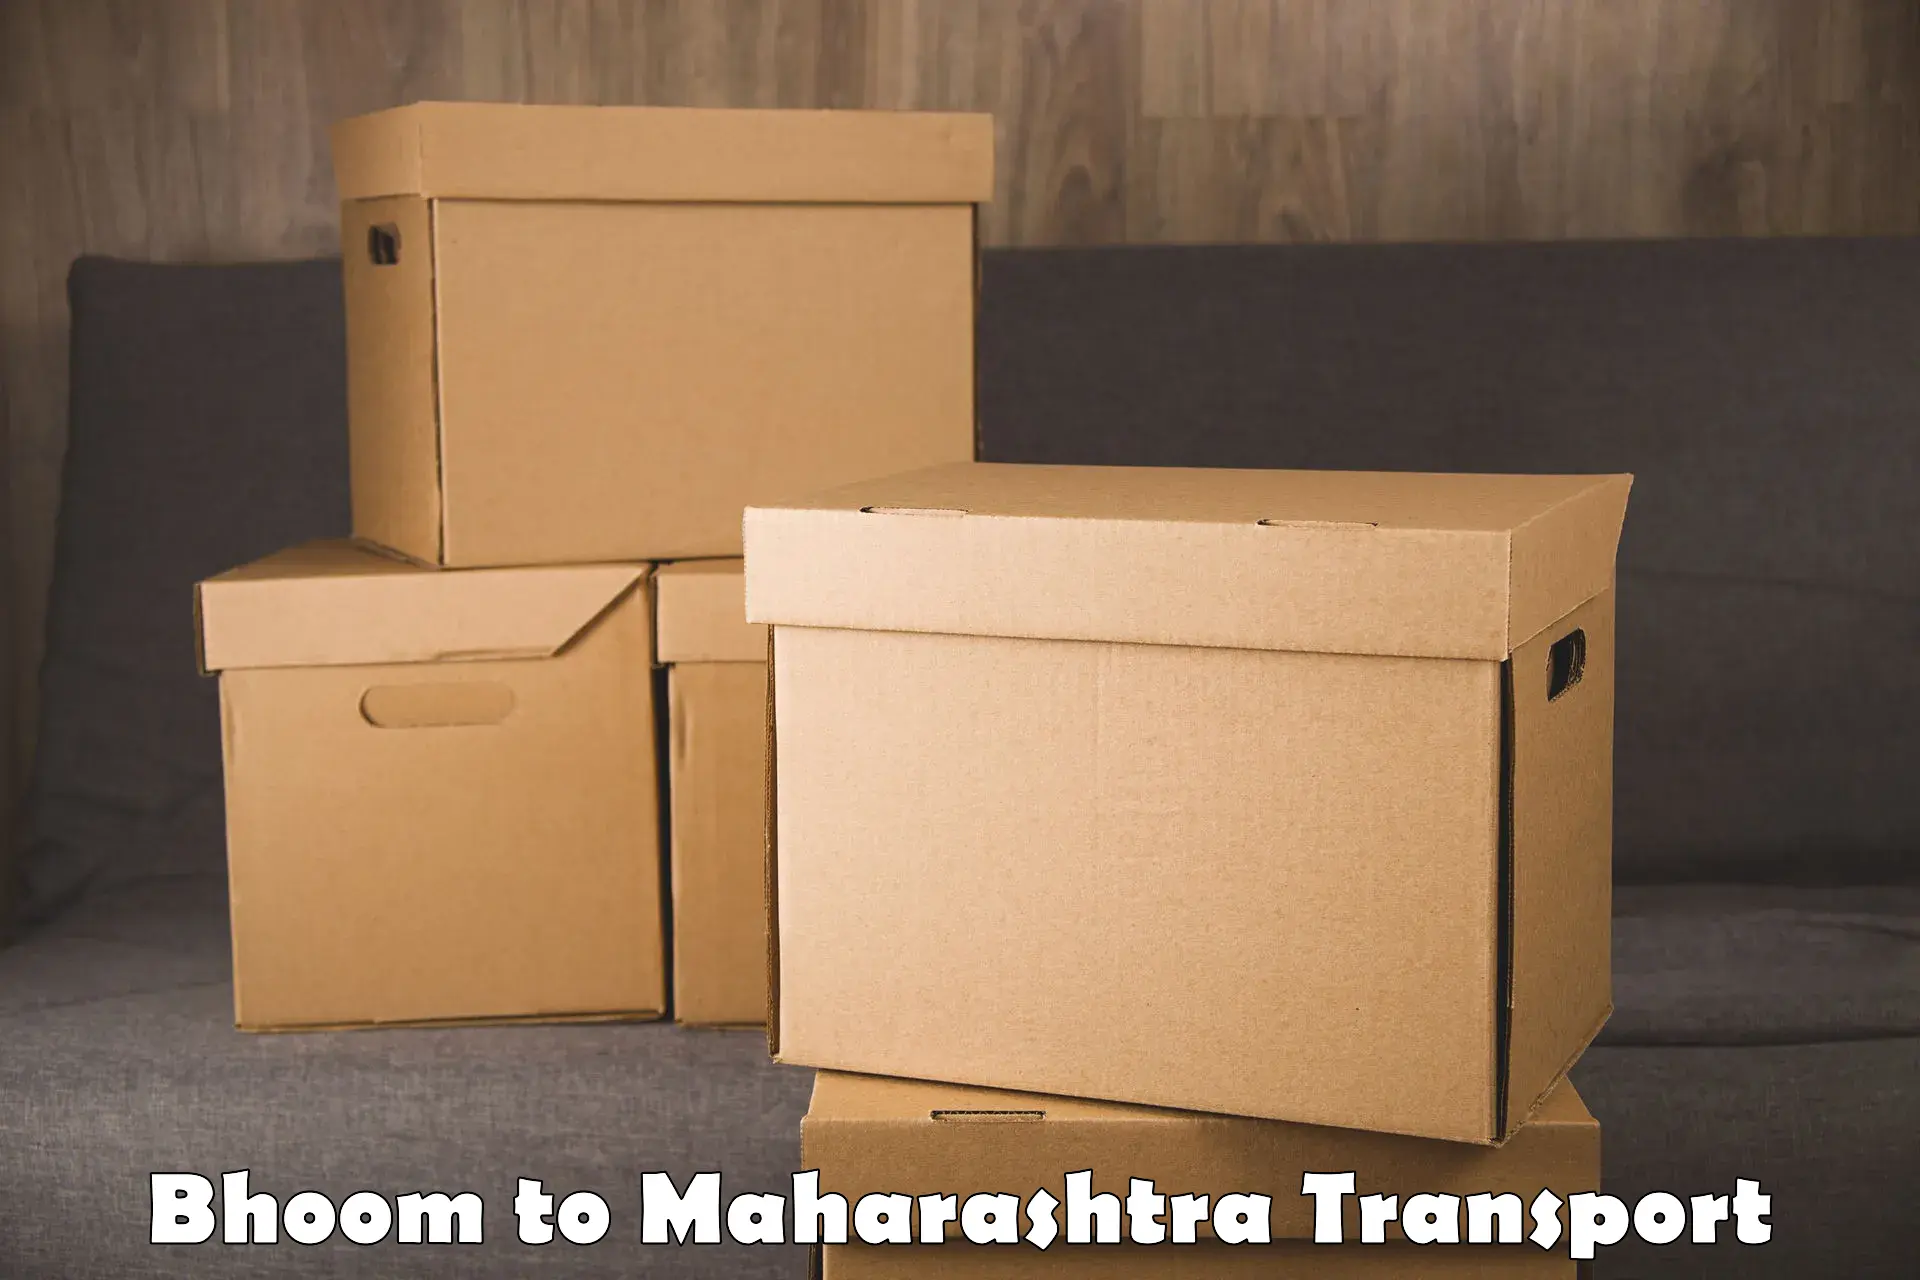 Truck transport companies in India in Bhoom to Shegaon